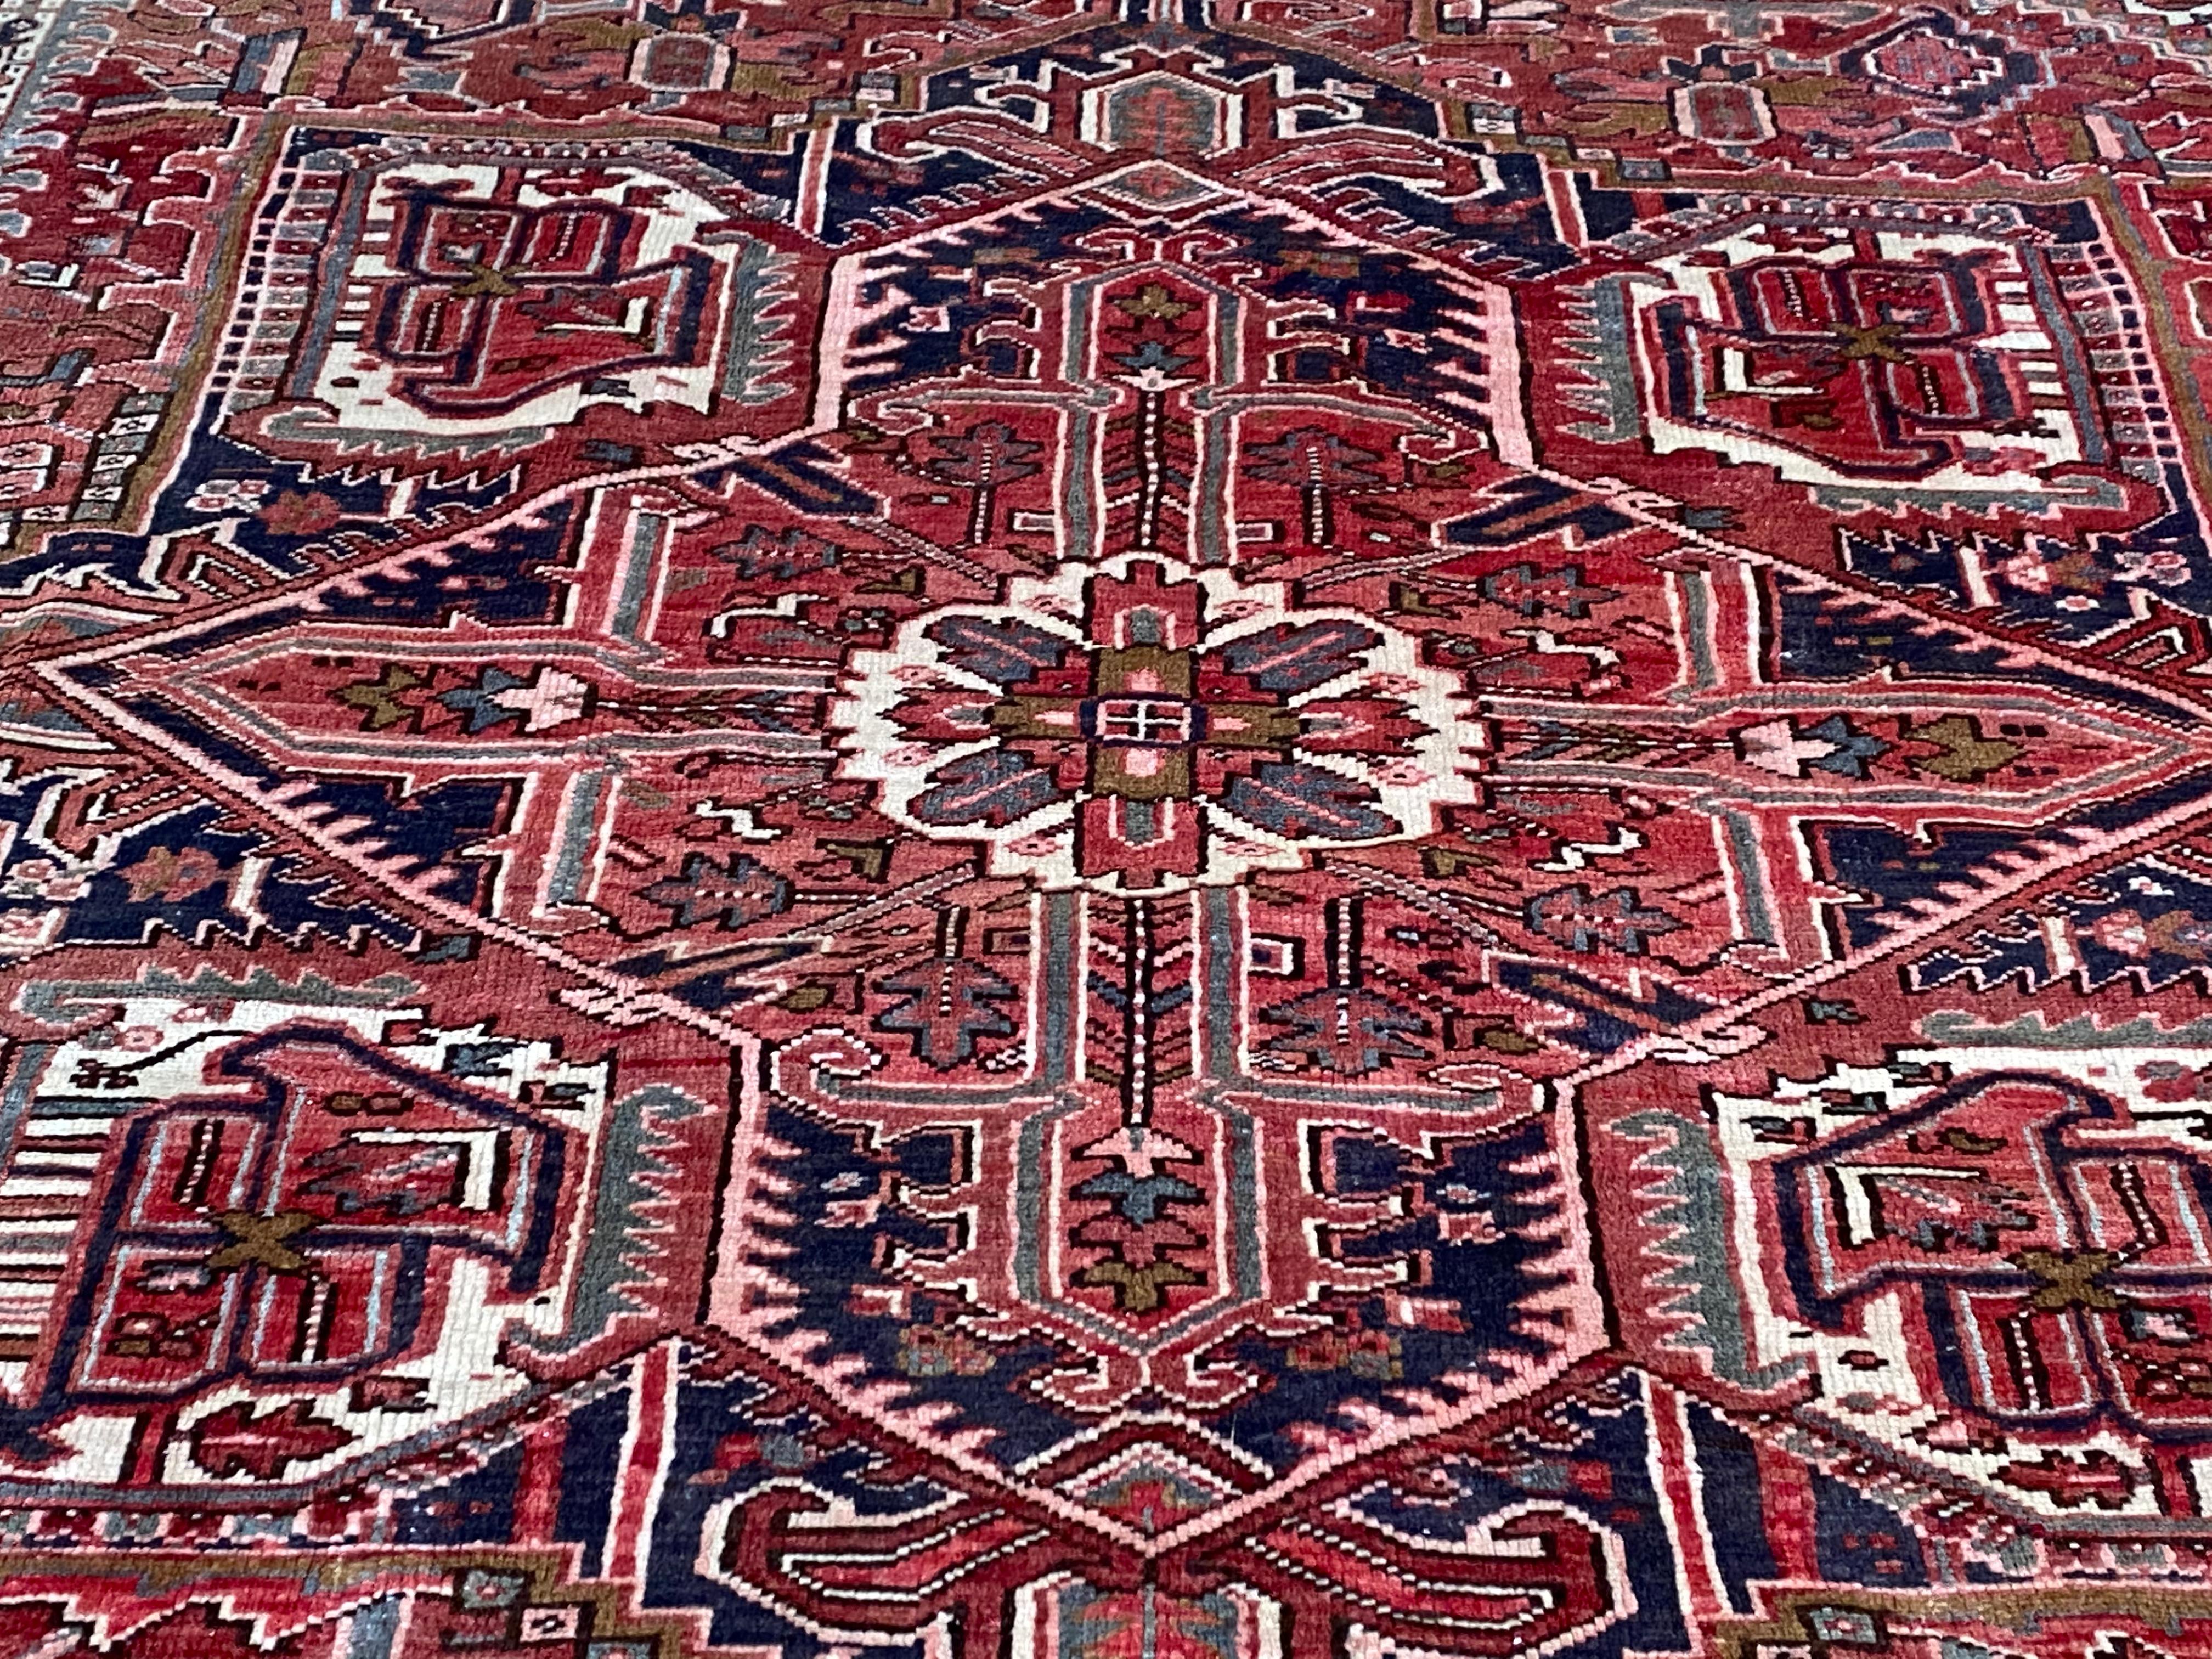 Late 19th to Early 20th Century Persian Rug In Good Condition For Sale In San Francisco, CA